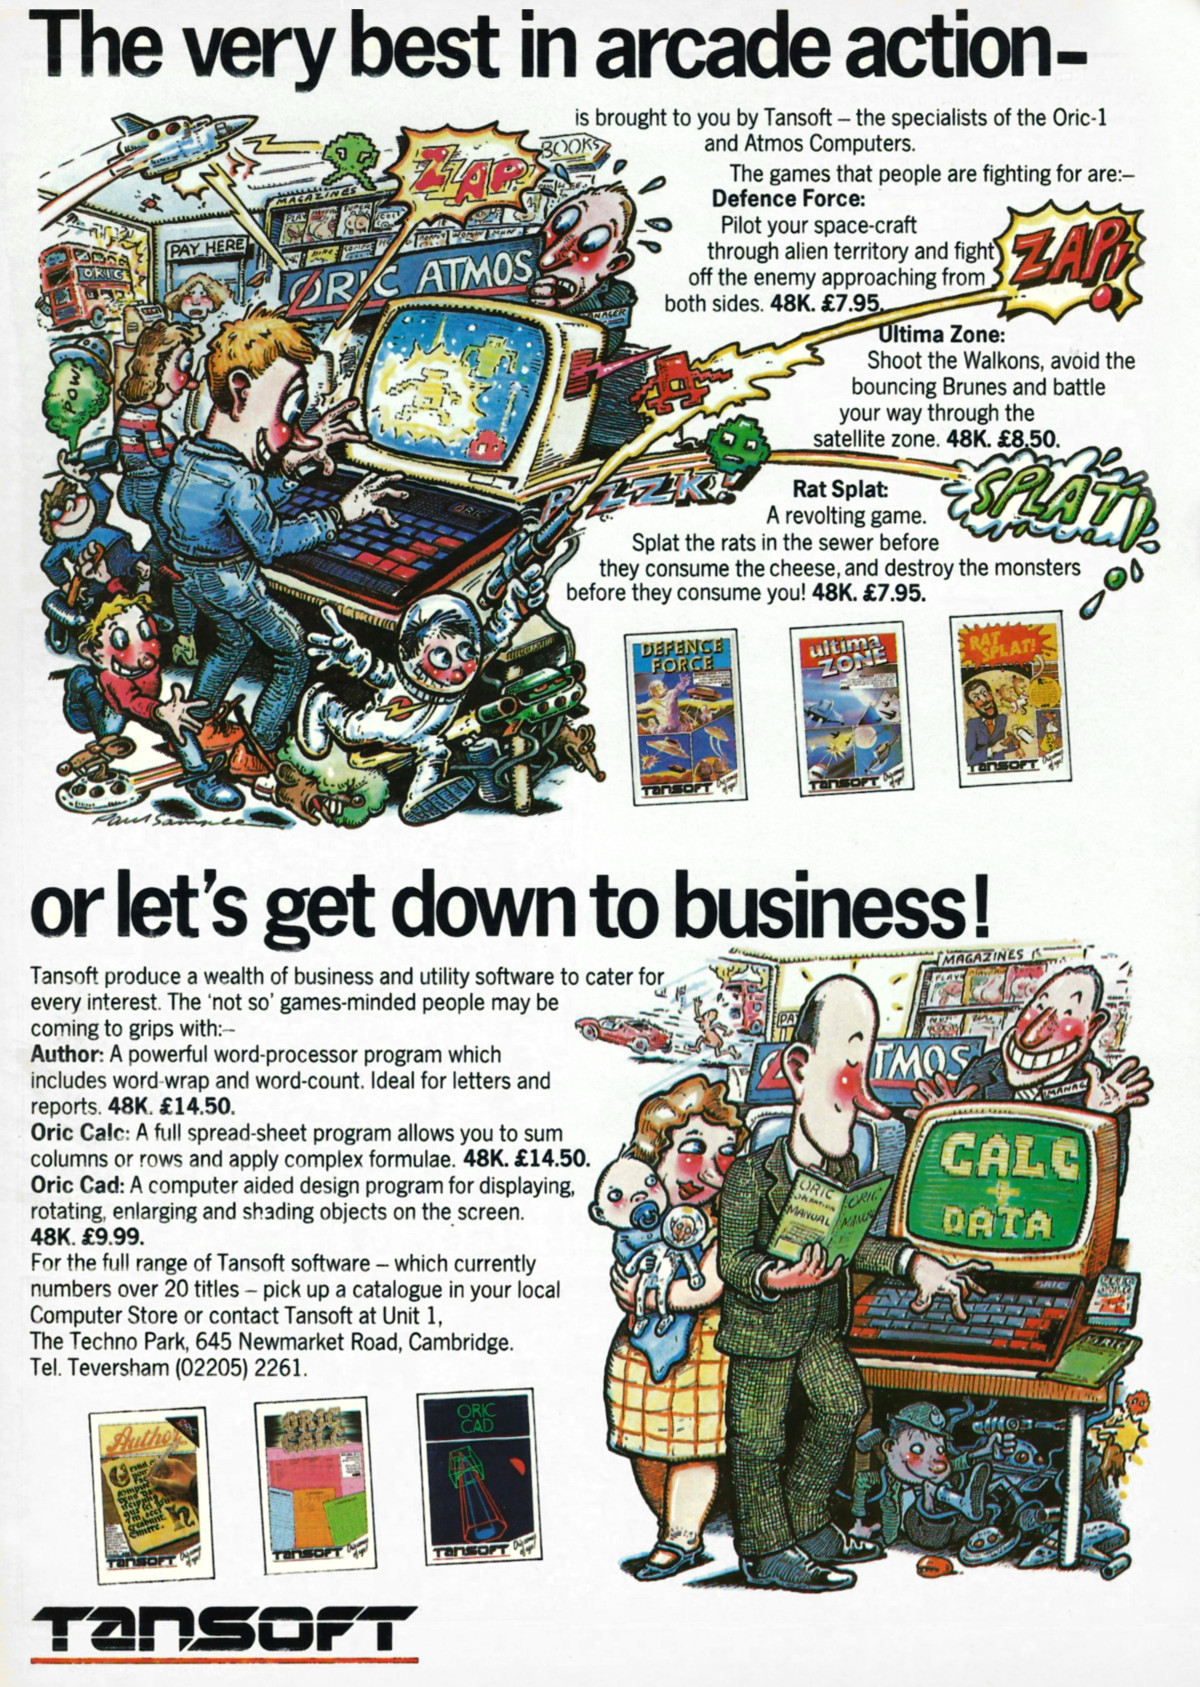 Tansoft advert, featuring Oric Cad and Oric Calc. From Your Computer, May 1984